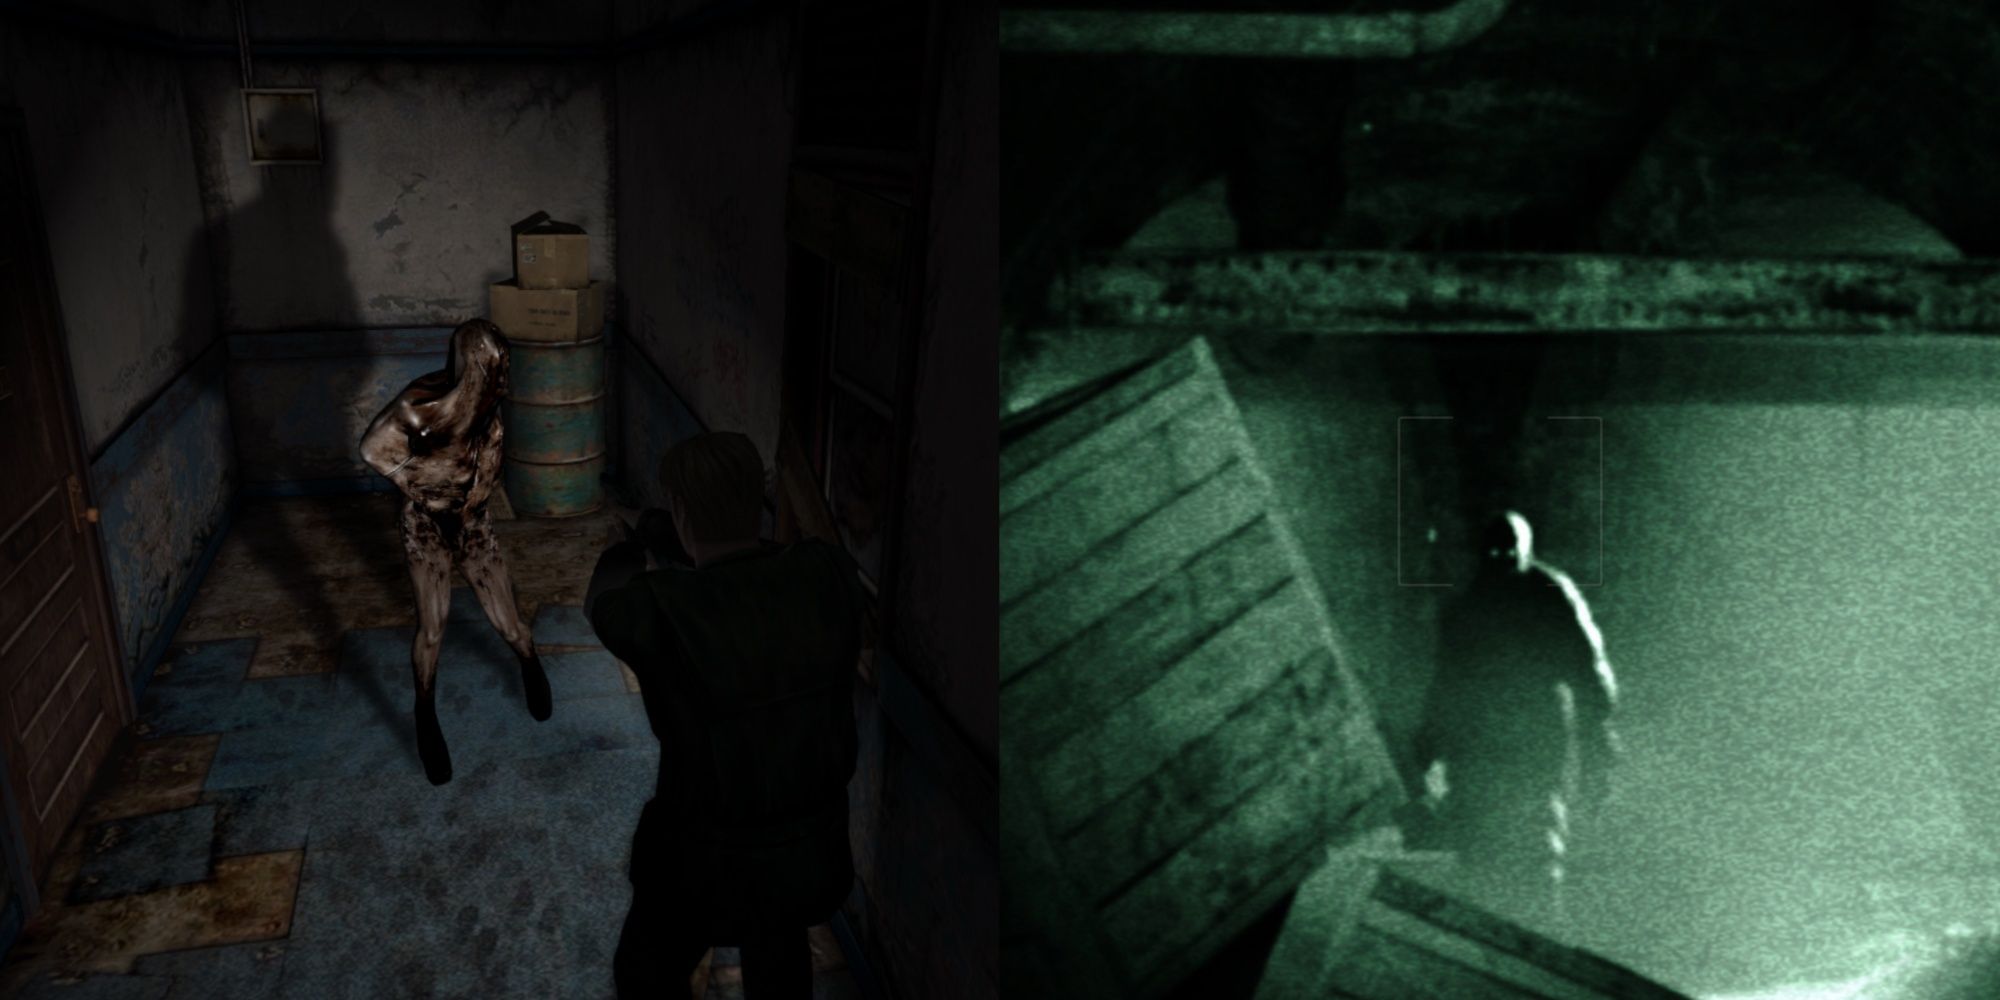 Split images of Silent Hill and Outlast